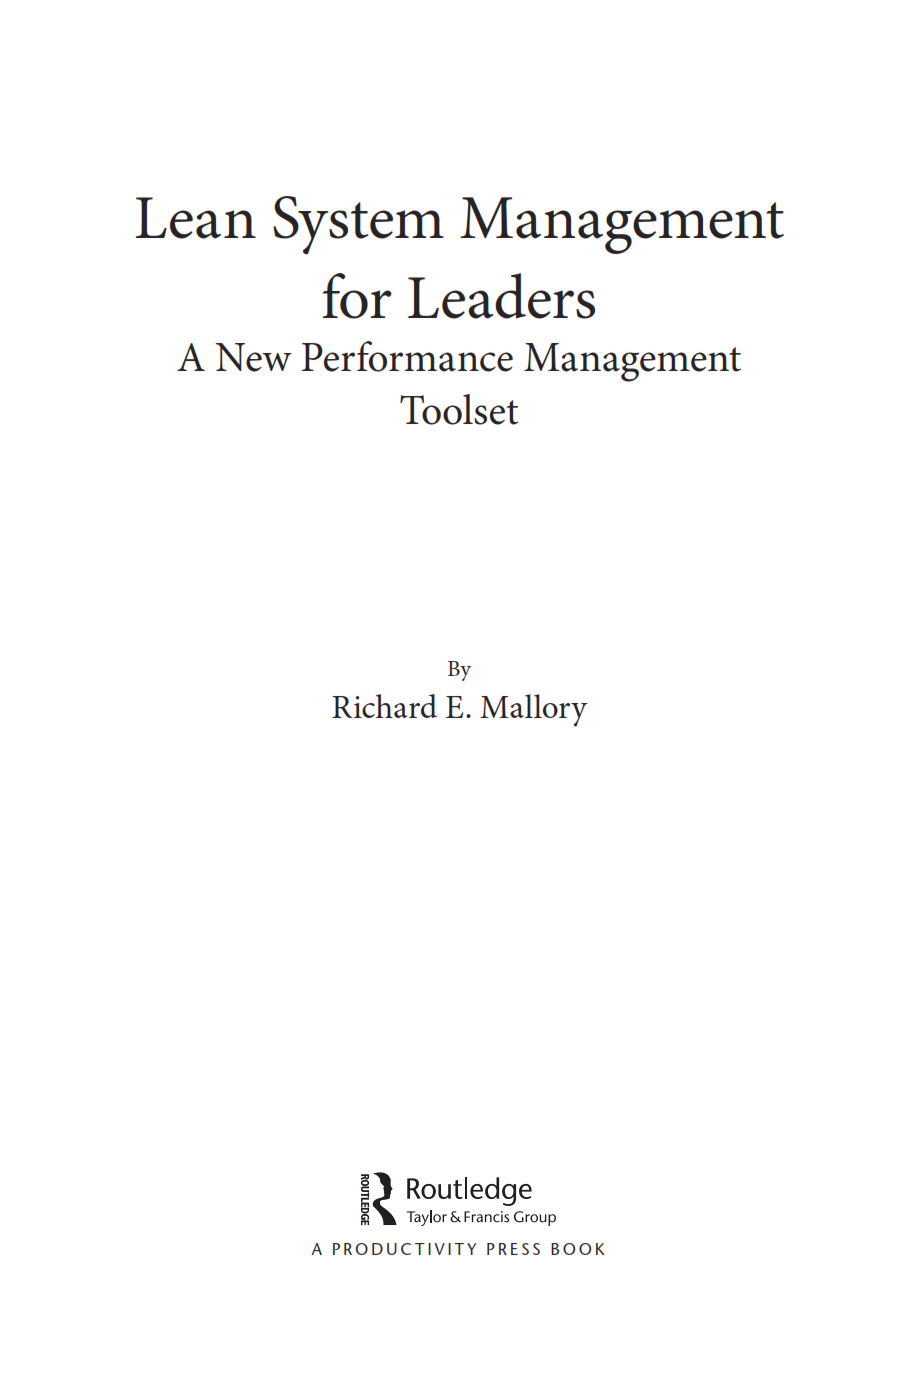 download free Lean System Management for Leaders A New Performance Management Toolset by Richard E. Mallory eBook in pdf format